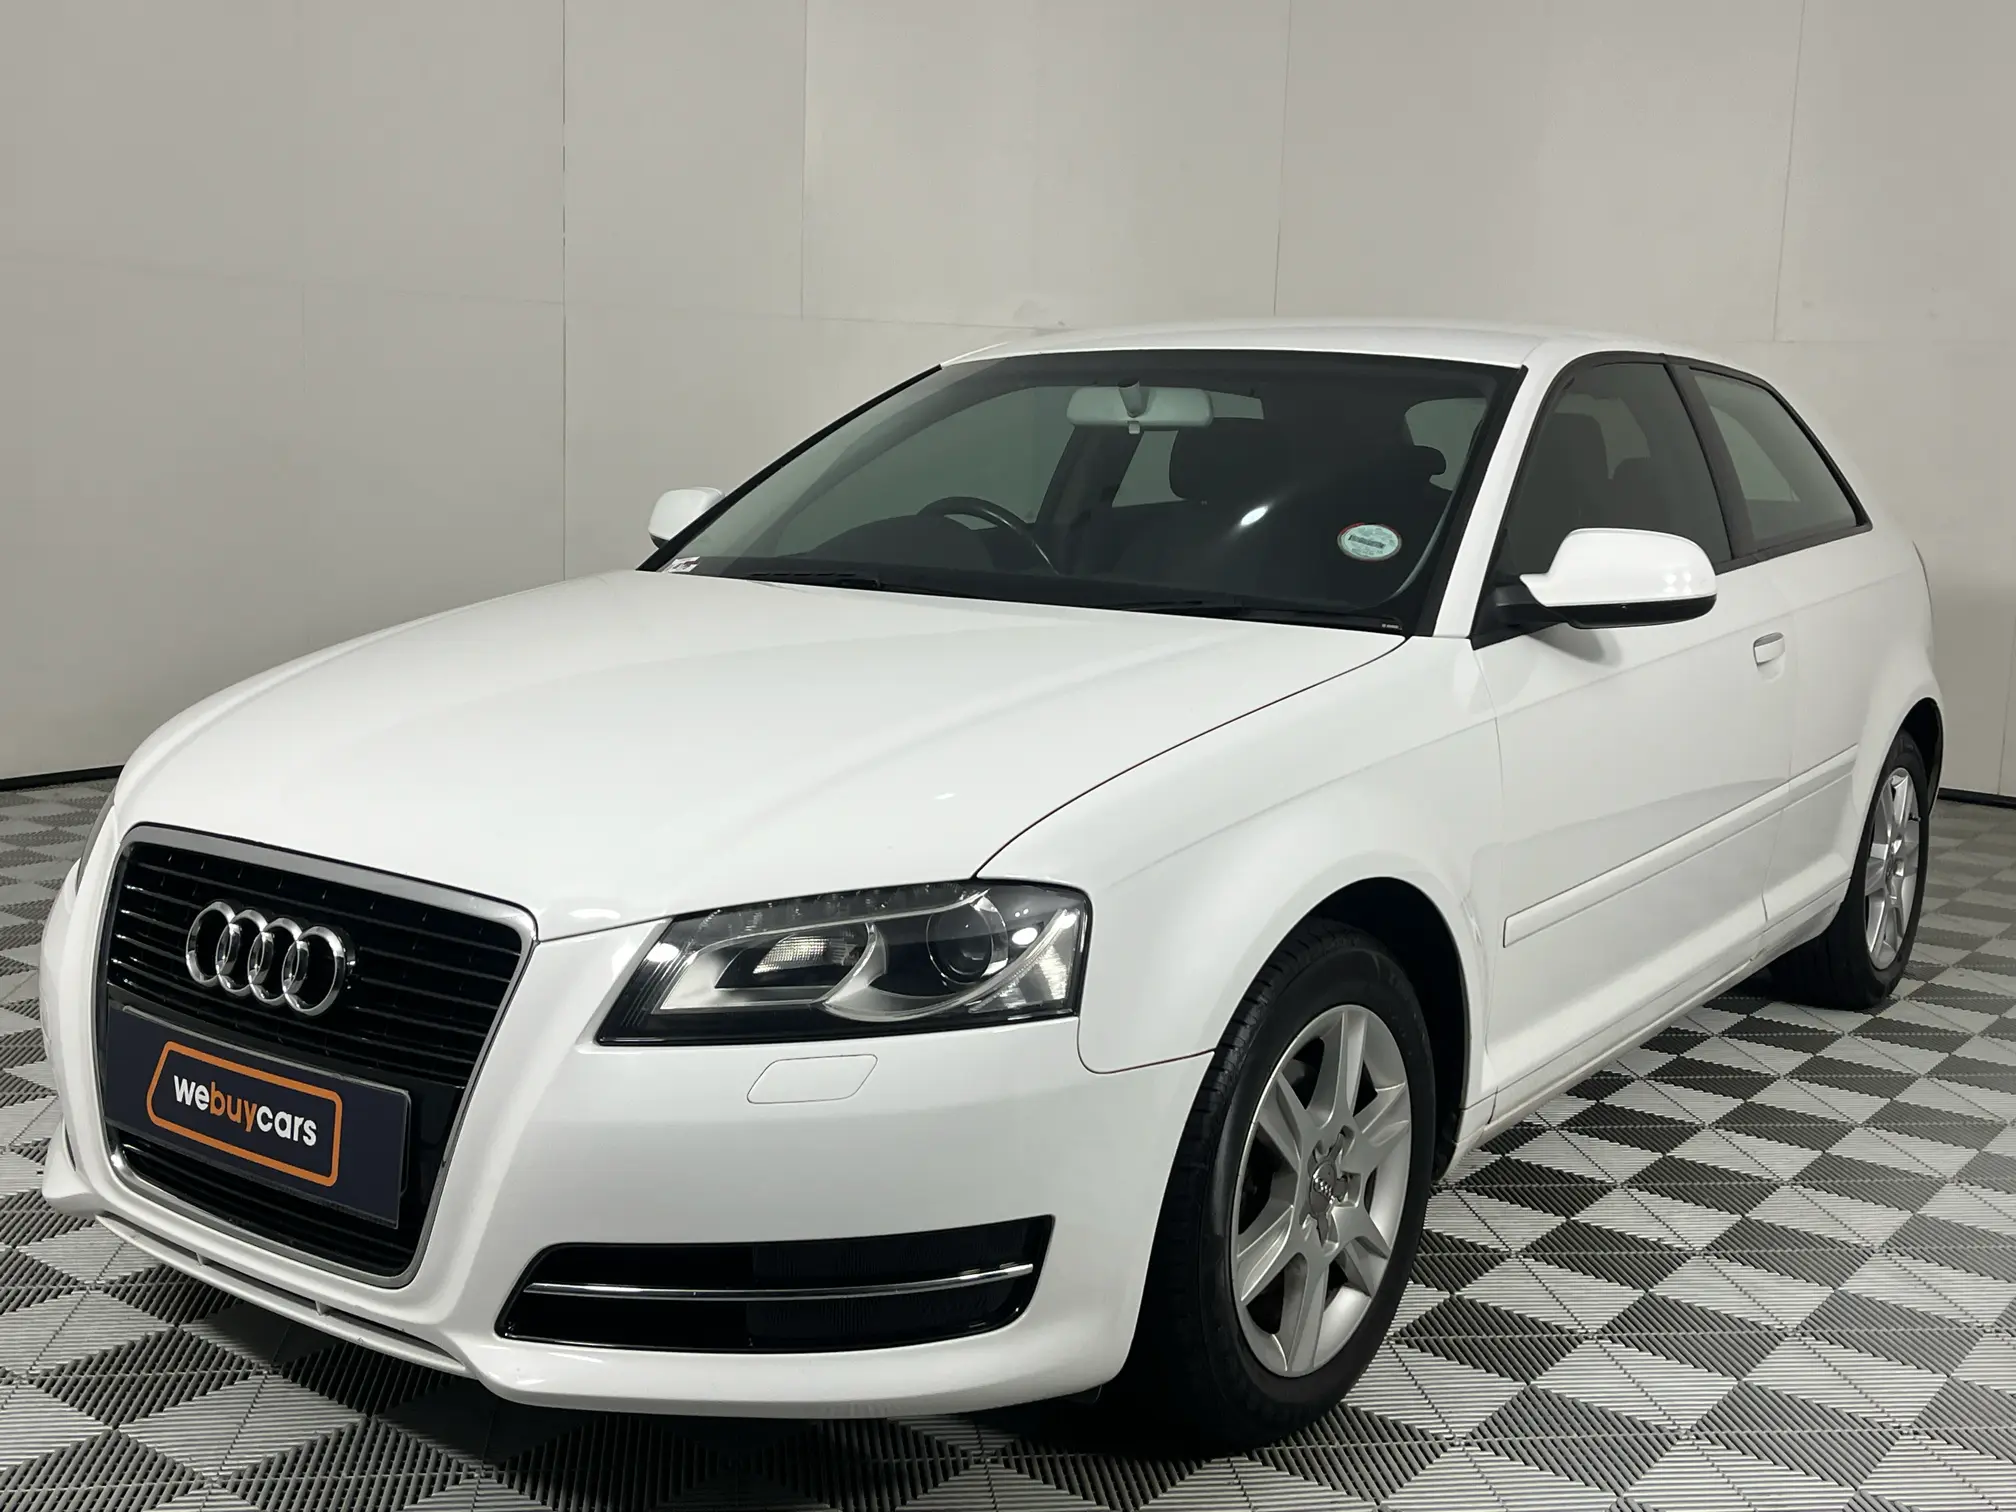 2012 Audi A3 1.4 TFSI Attraction Stronic